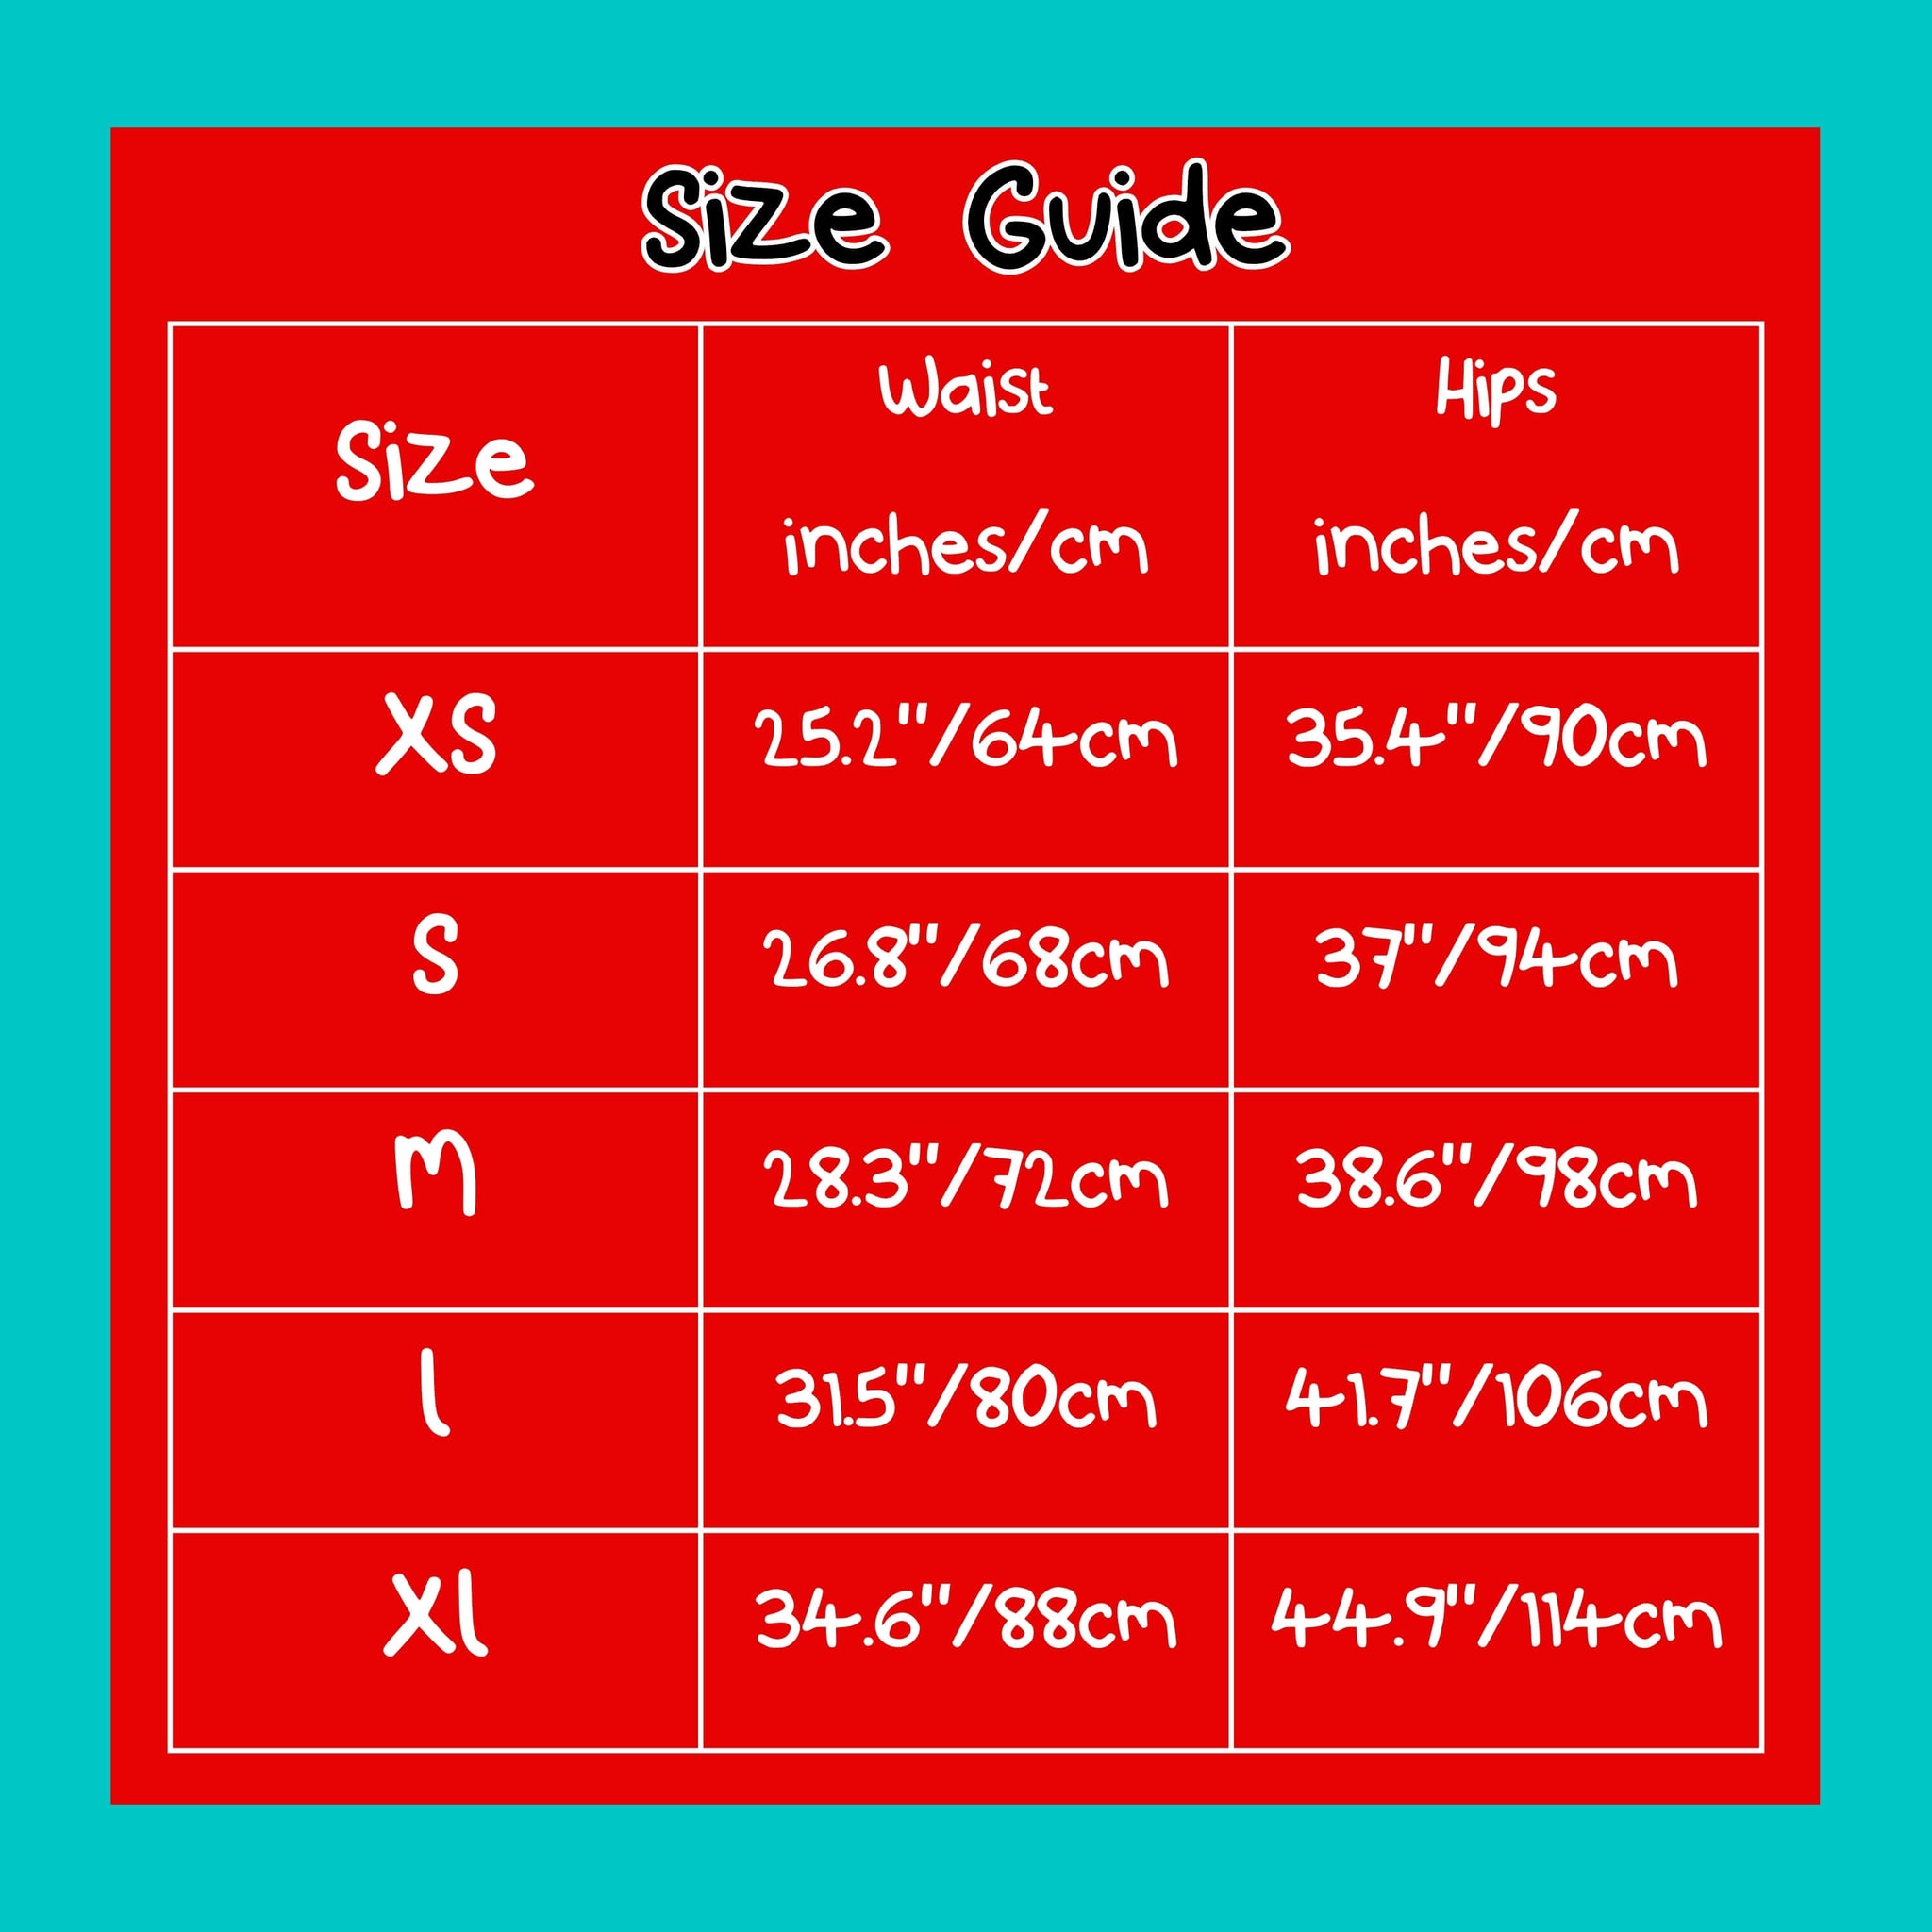 Size guide size chart measurements of the Disabili Tea and biscuits - disability plus size leggings on a red and blue background in centimetres and inches.